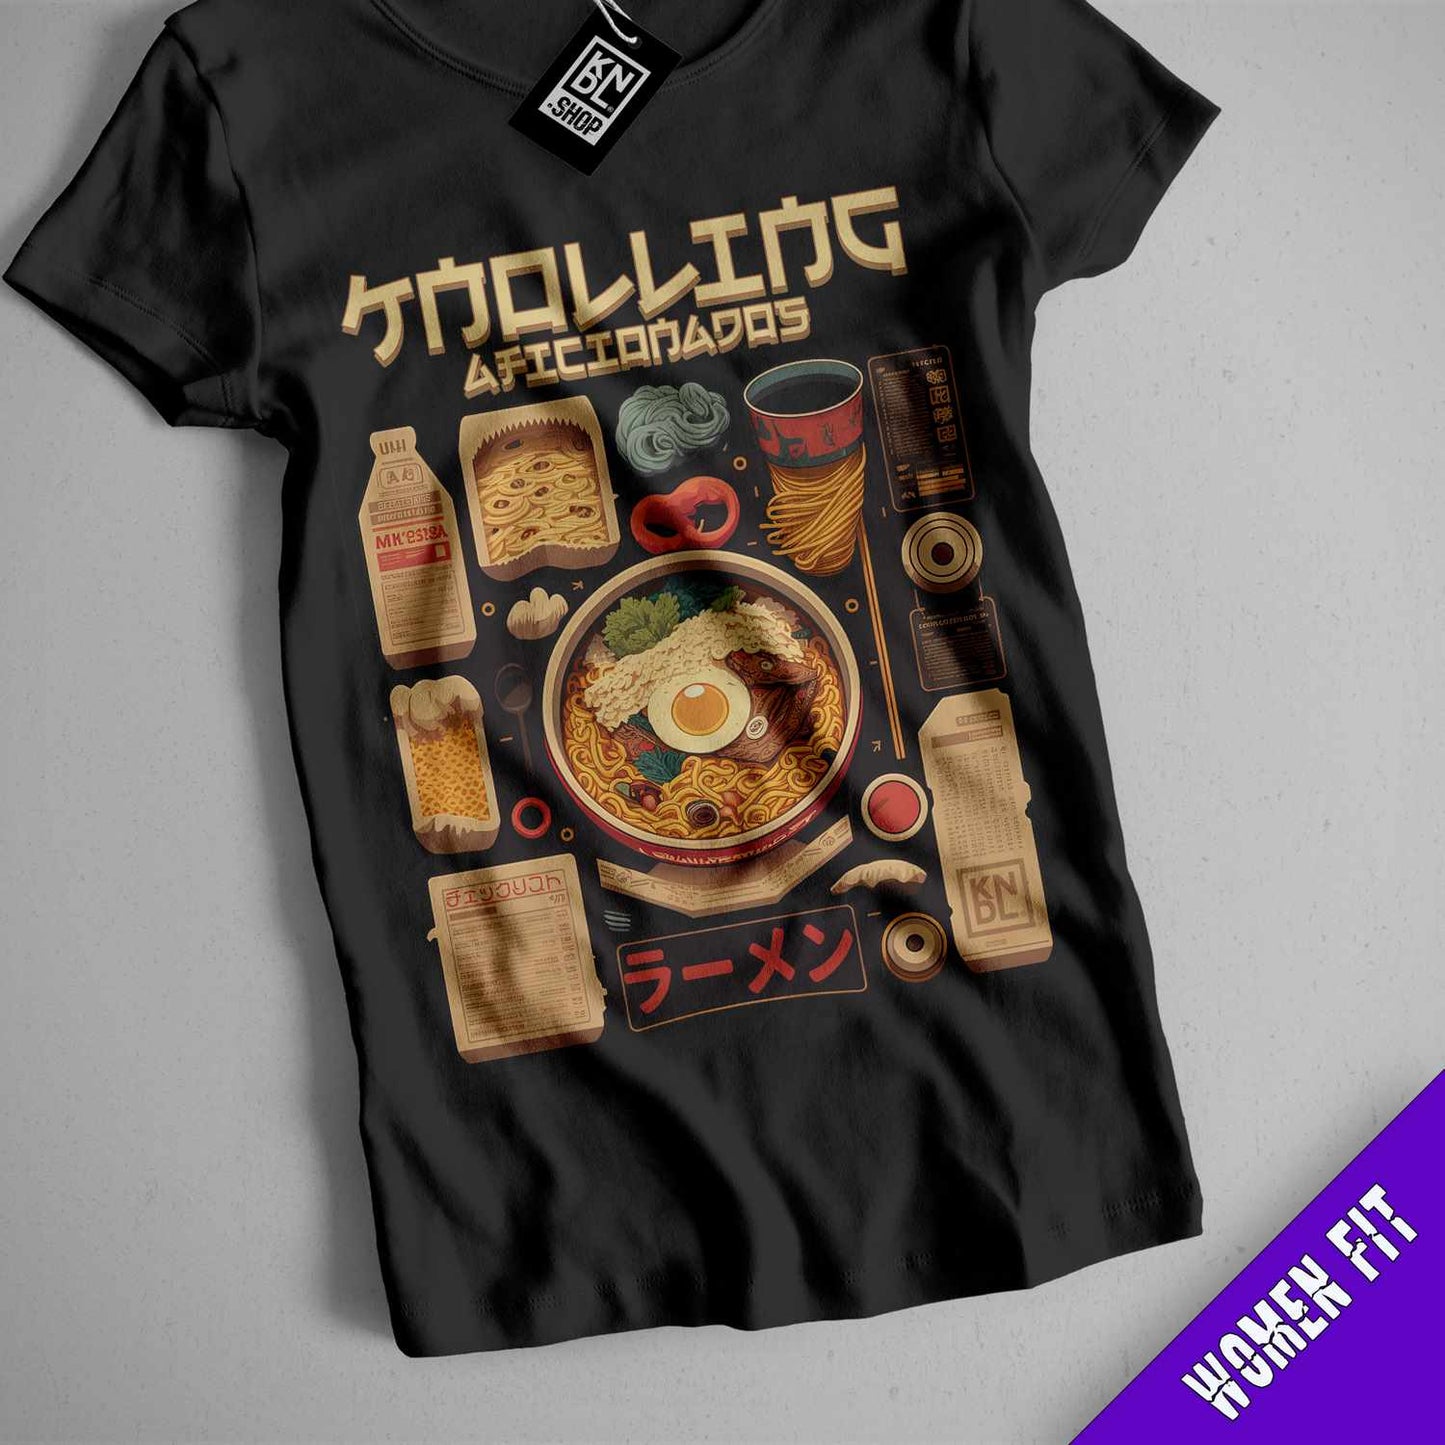 a t - shirt with a picture of a plate of food on it